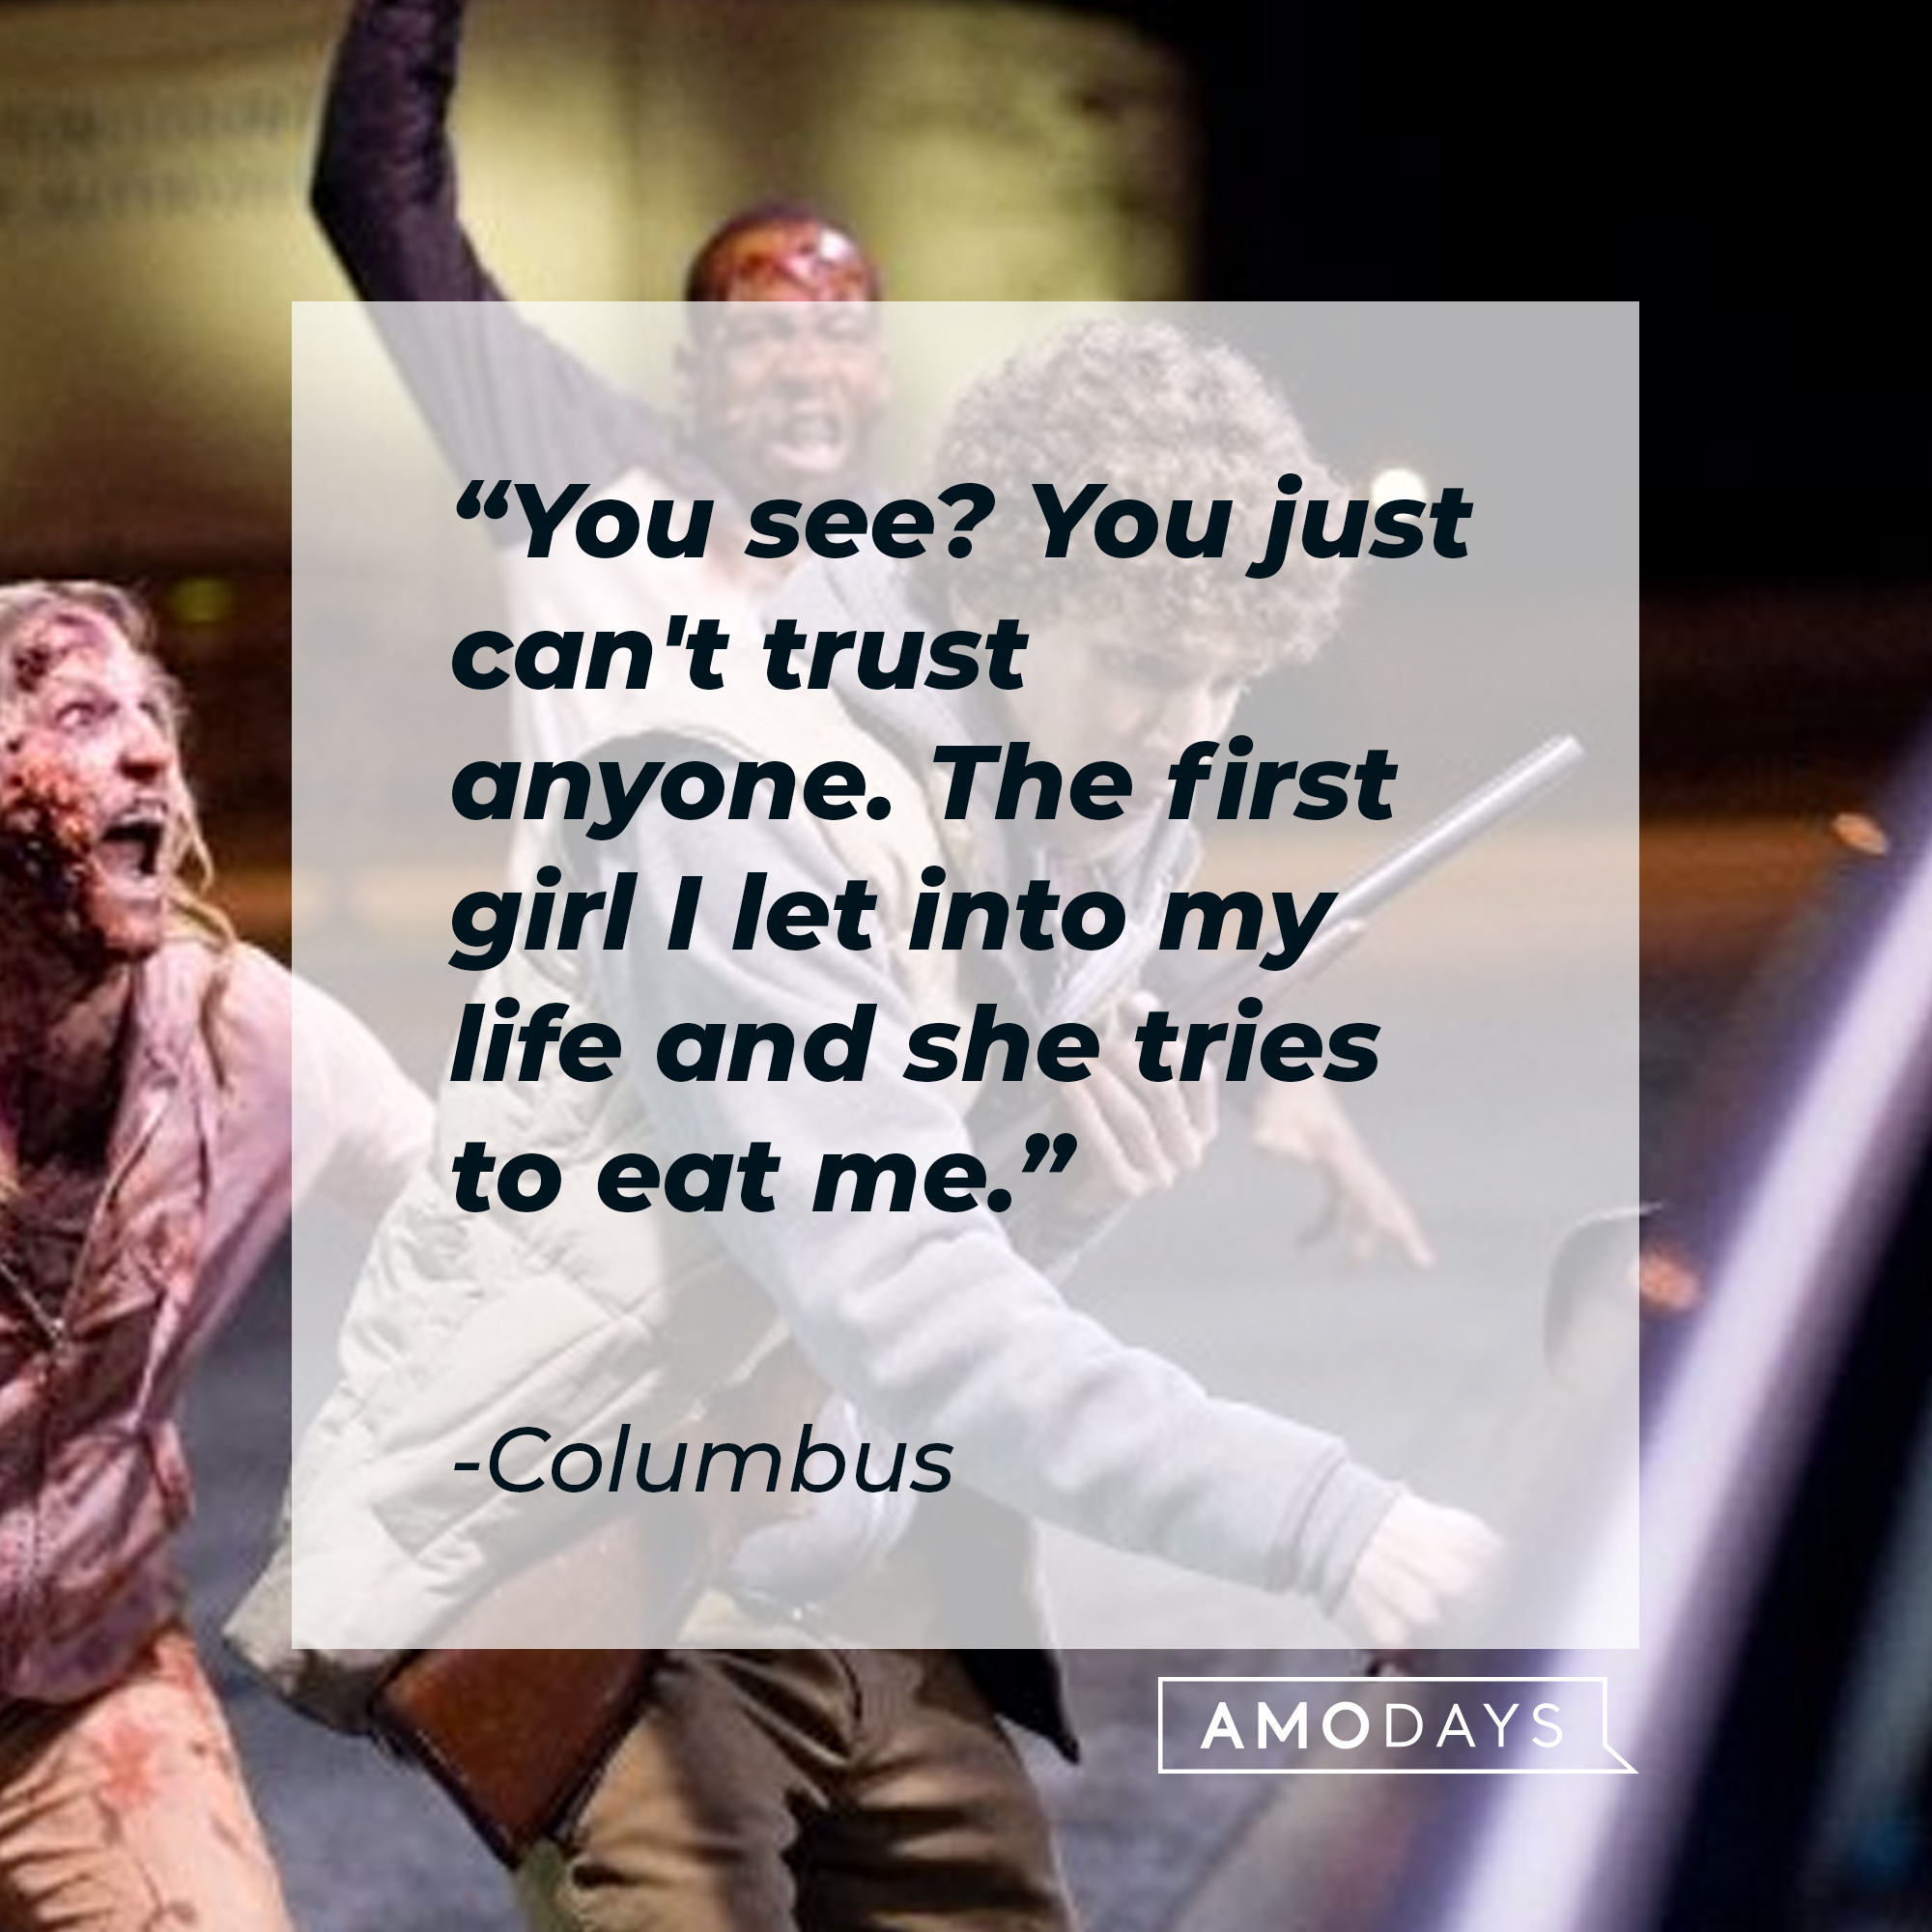 Columbus' quote: "You see? You just can't trust anyone. The first girl I let into my life and she tries to eat me." | Source: Facebook.com/Zombieland